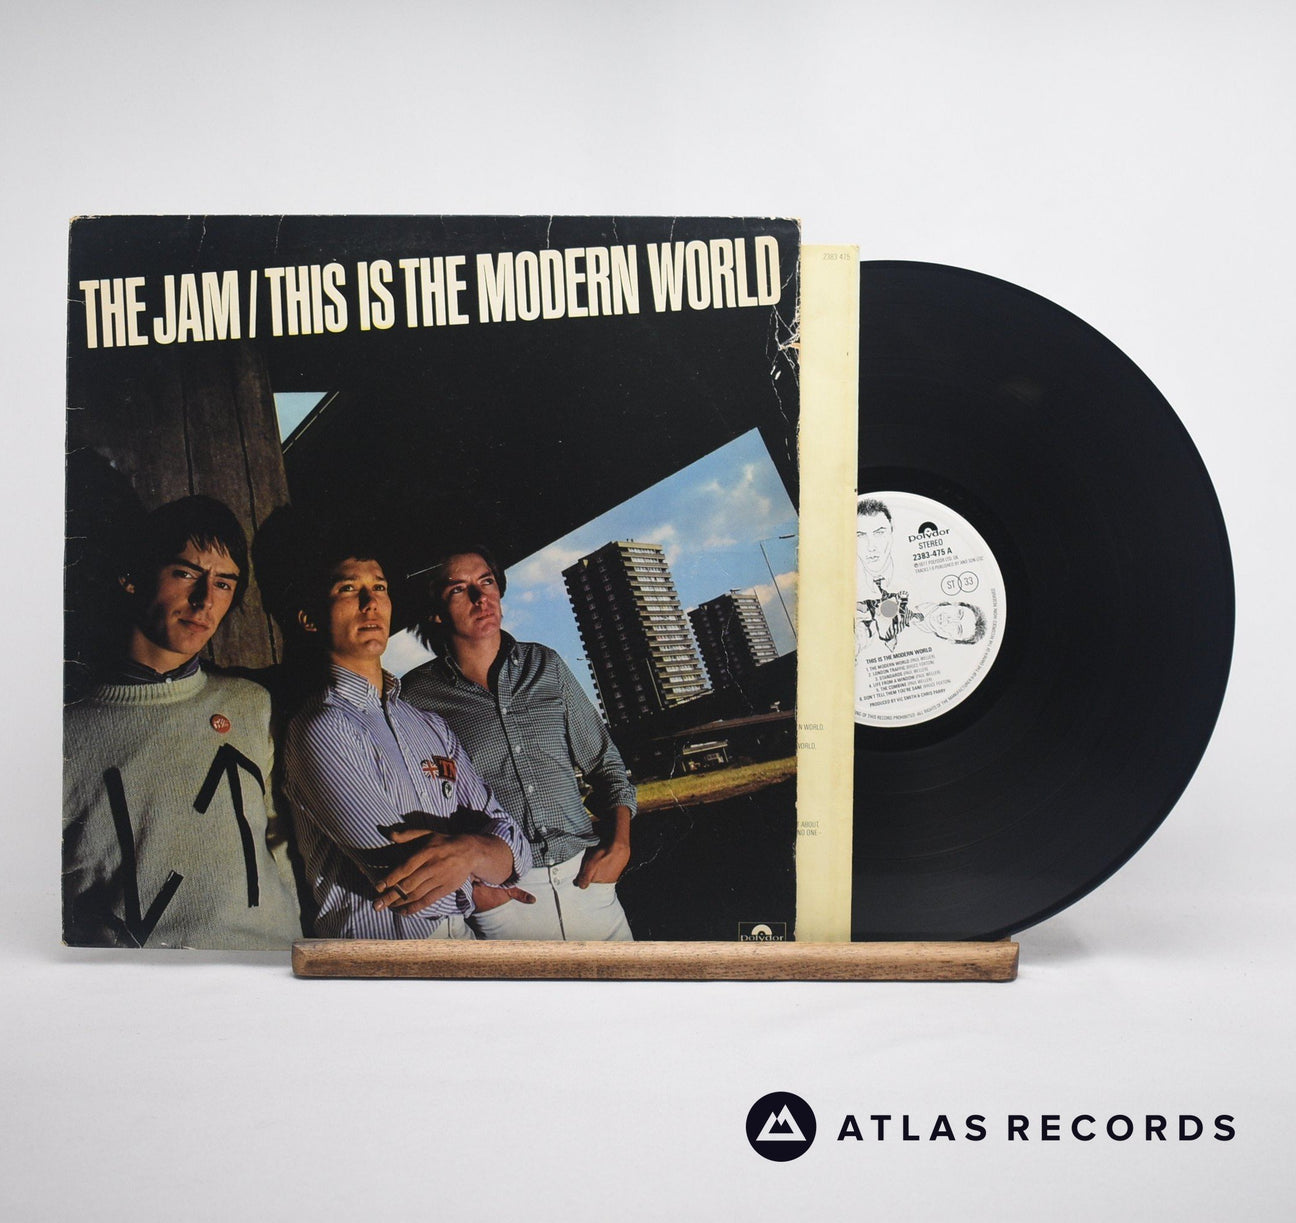 The Jam This Is The Modern World LP Vinyl Record - Front Cover & Record